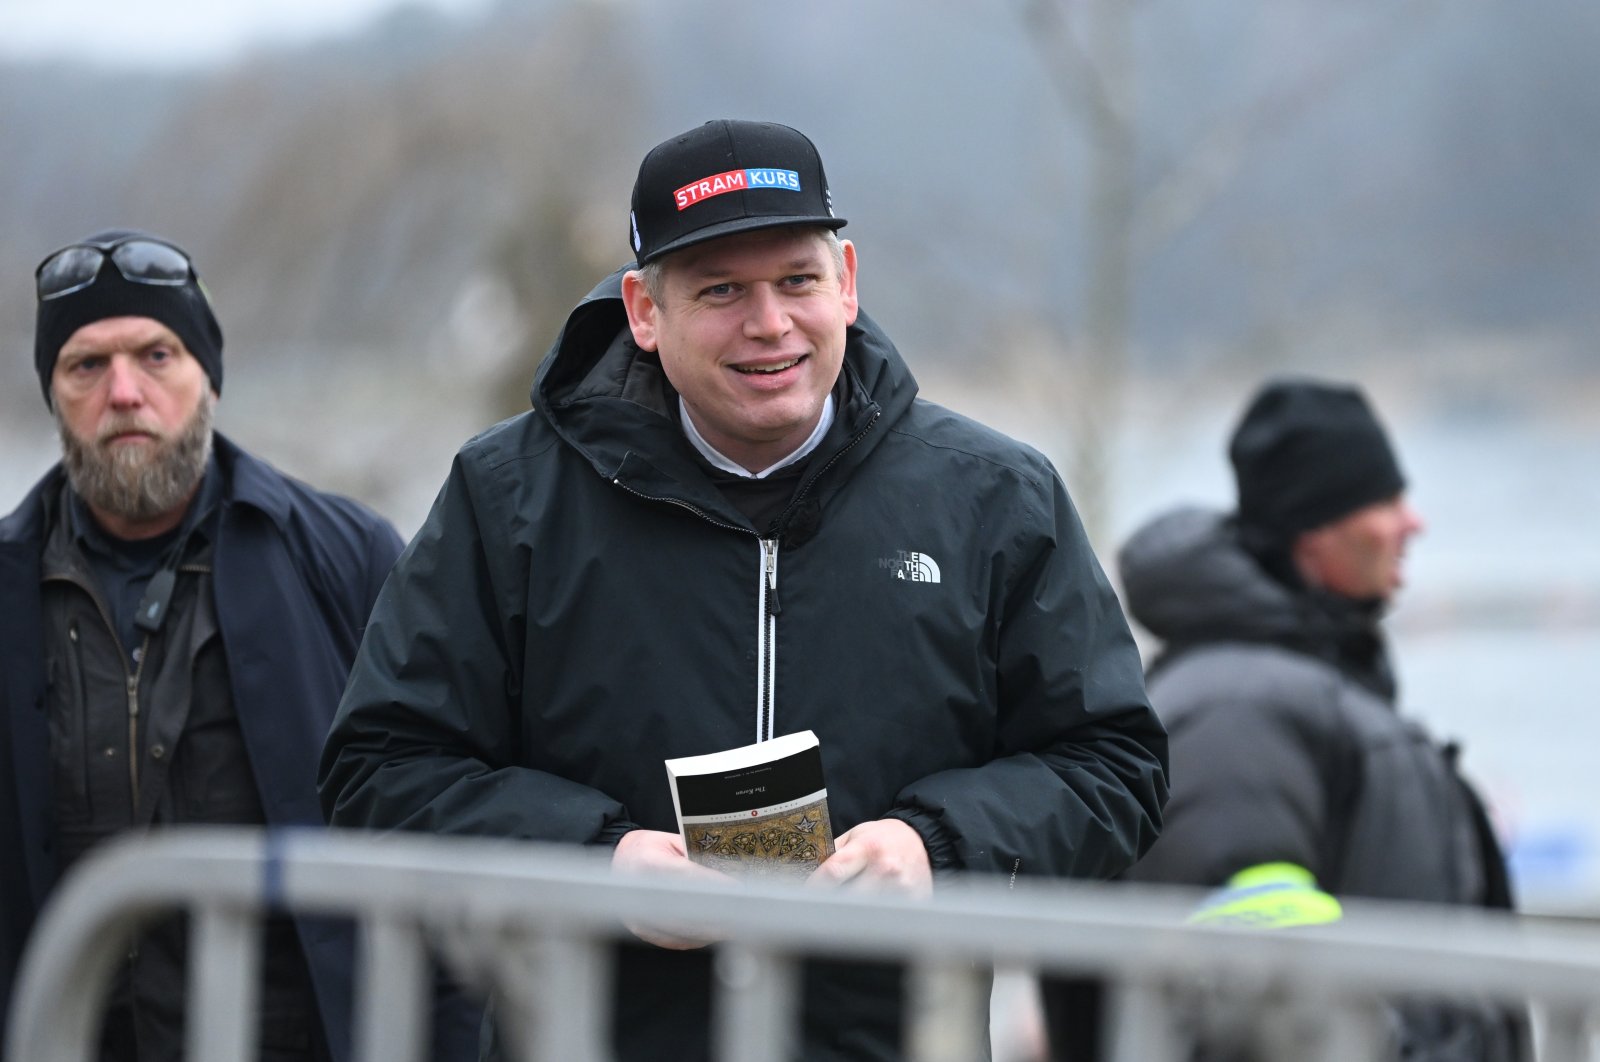 The leader of the far-right Danish political party Stram Kurs Rasmus Paludan delivers a speech before he burns Islam&#039;s holy book, the Quran, outside the Turkish Embassy in Stockholm, Sweden, Jan. 21, 2023. (IHA Photo)